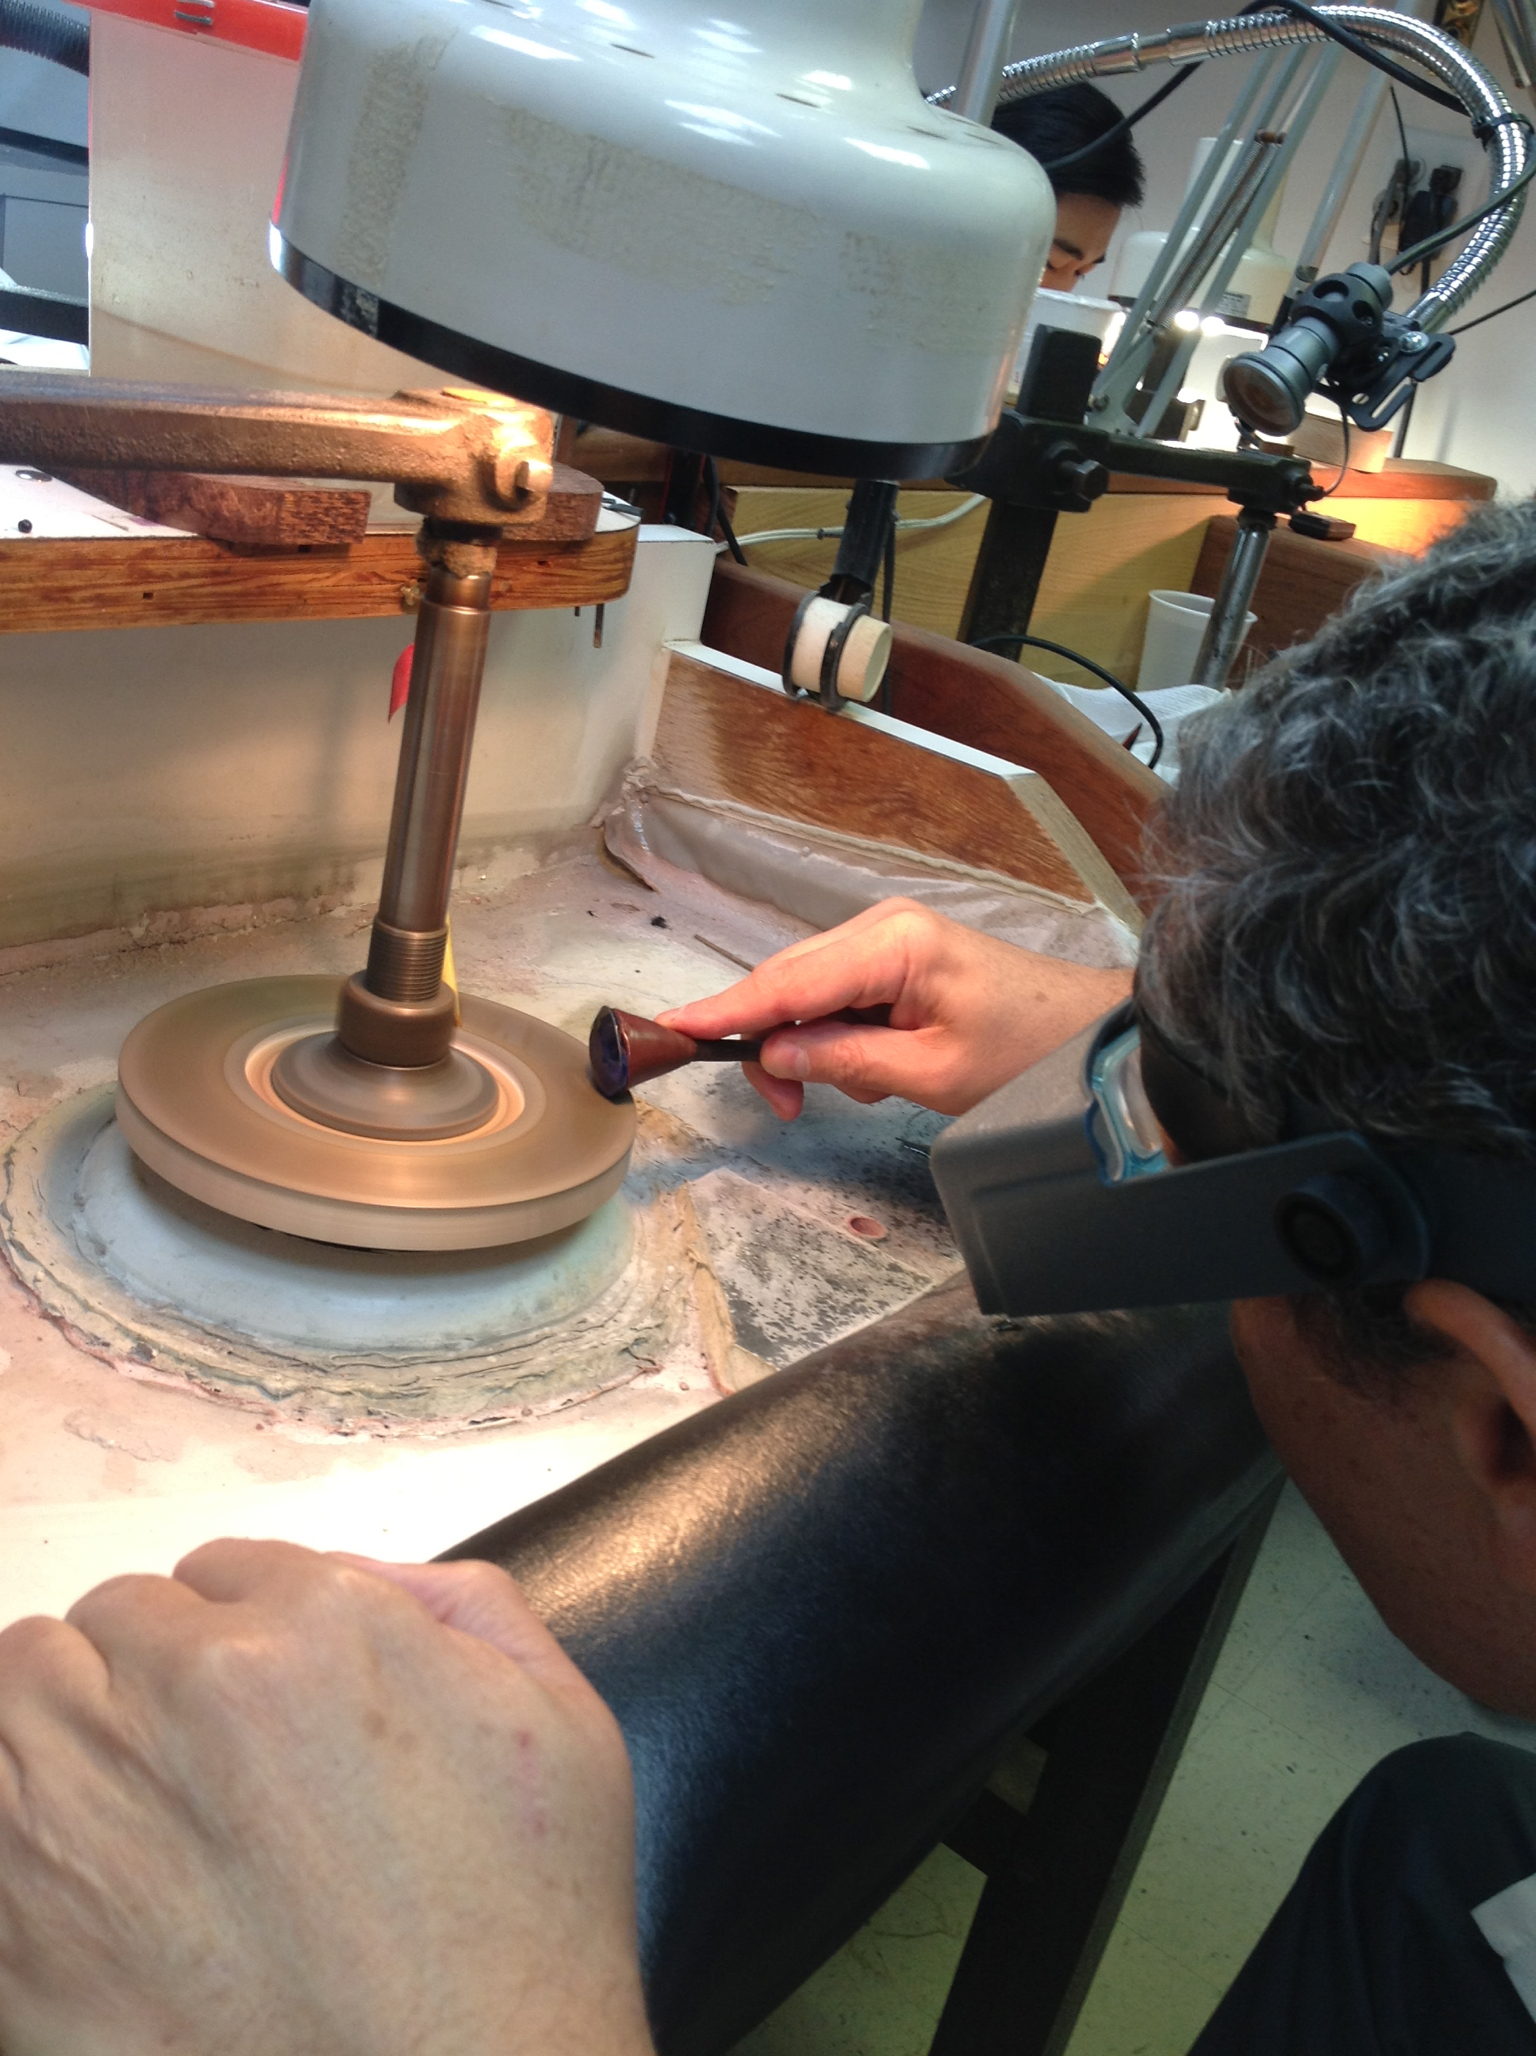 A 120 carat sapphire's girdle is being cut on legendary cutting wheels